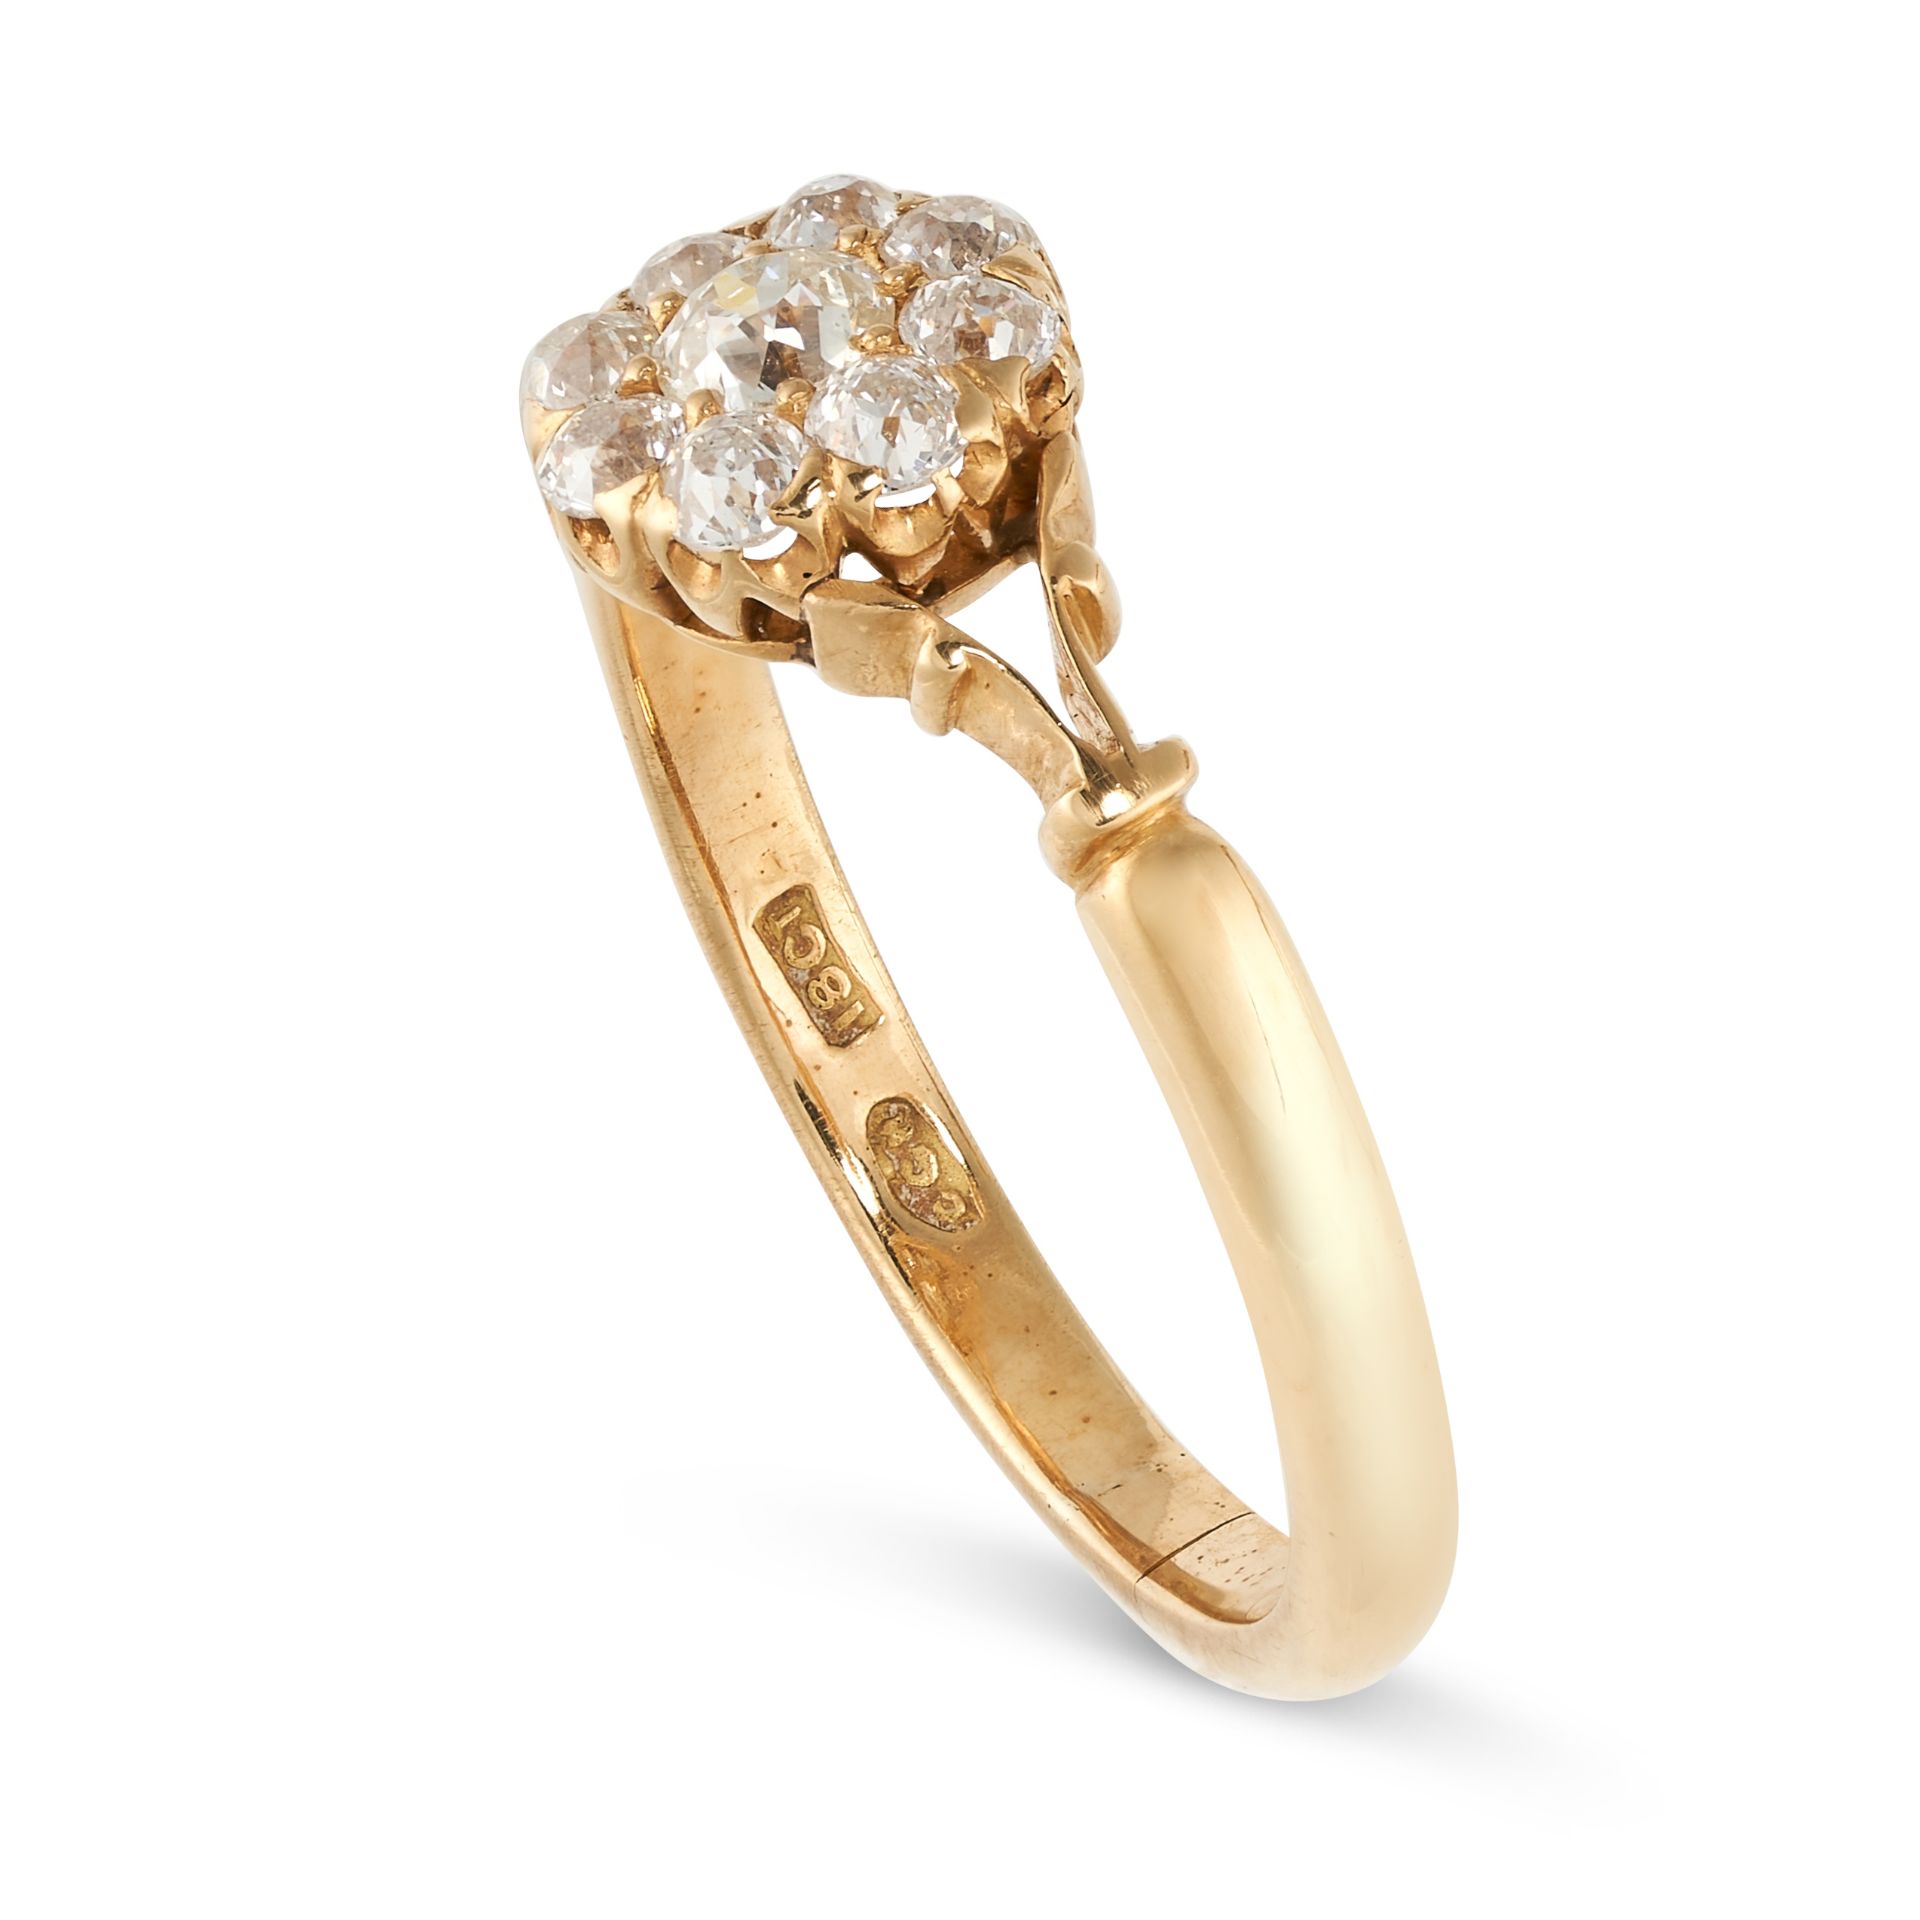 NO RESERVE - AN ANTIQUE DIAMOND CLUSTER RING in 18ct yellow gold, set with nine old cut diamonds, - Image 2 of 2